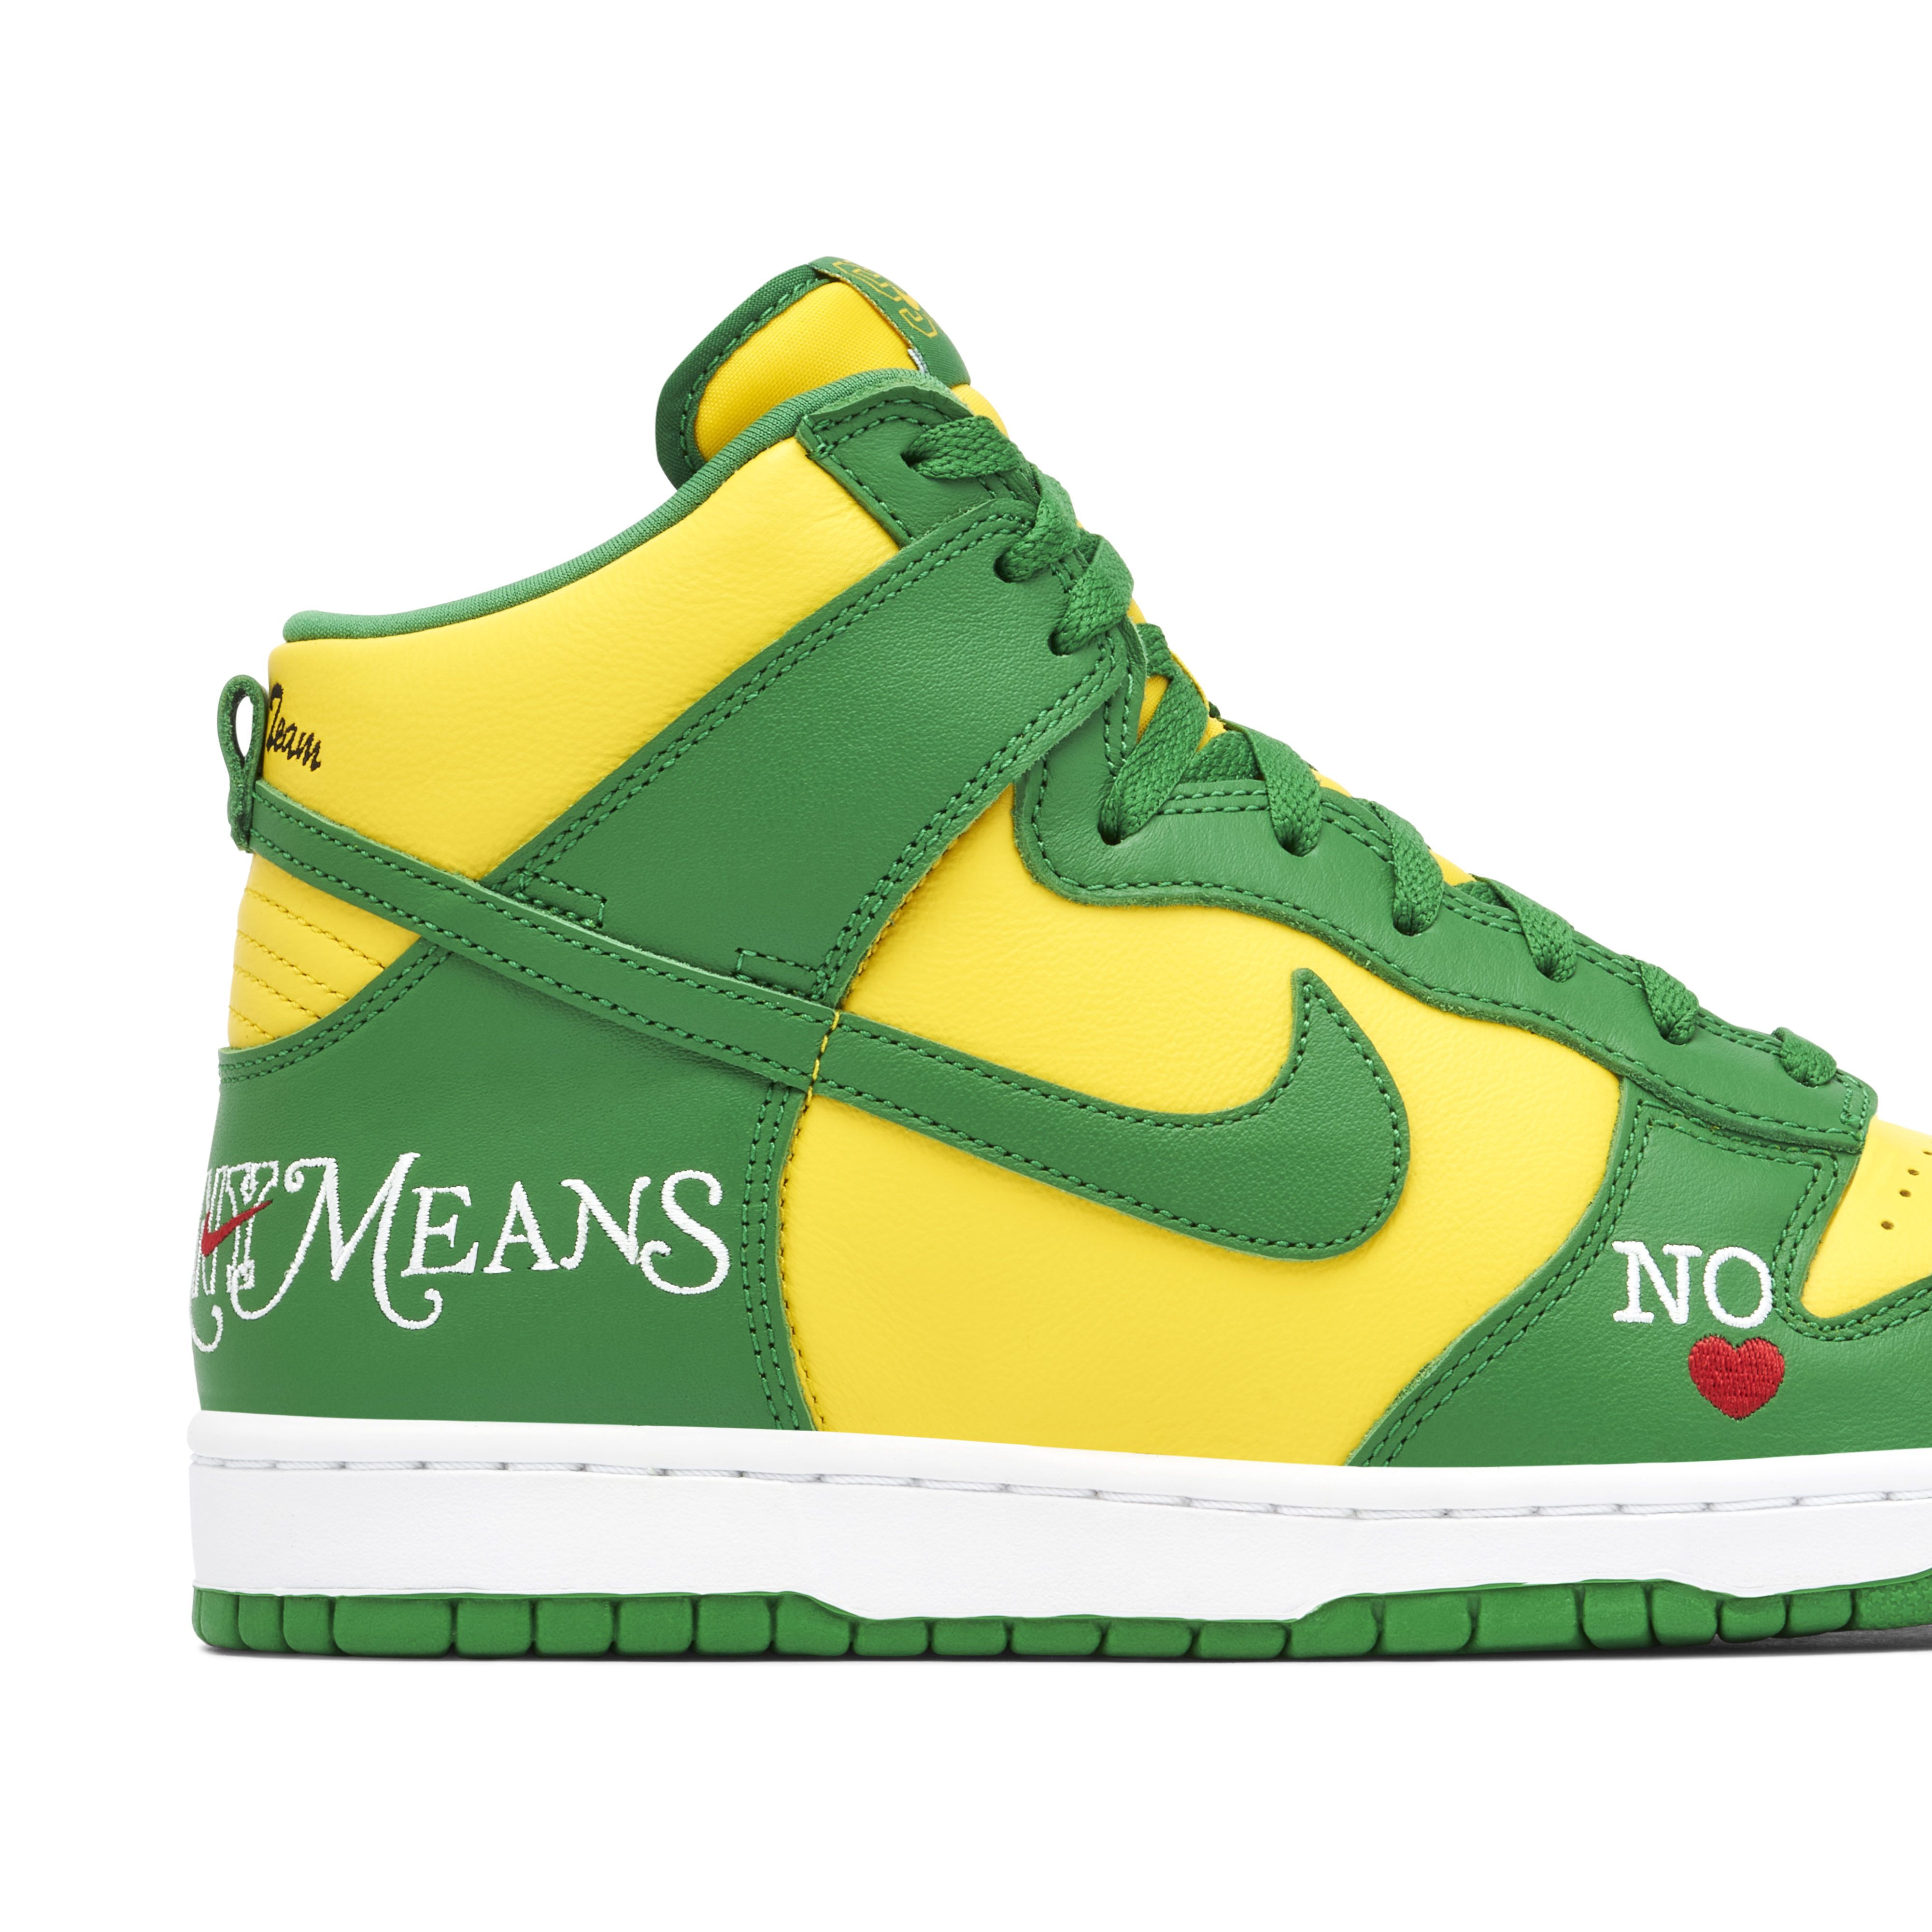 Supreme x Nike SB Dunk High By Any Means Brazil | DN3741-700 | Laced